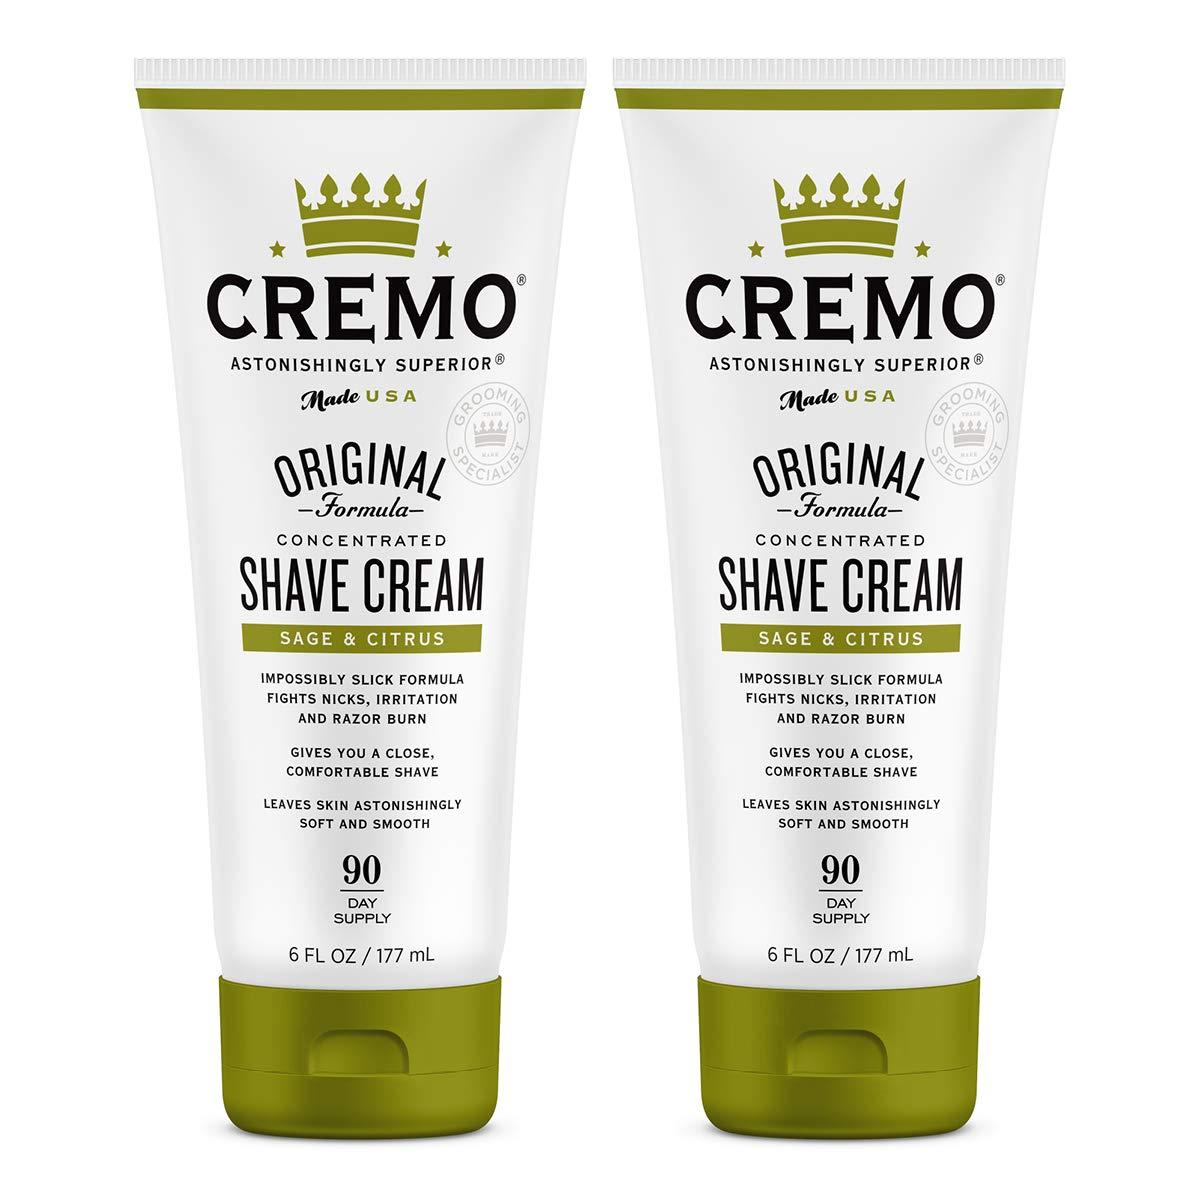 Cremo Barber Grade Shave Cream 2 Pack for $7.49